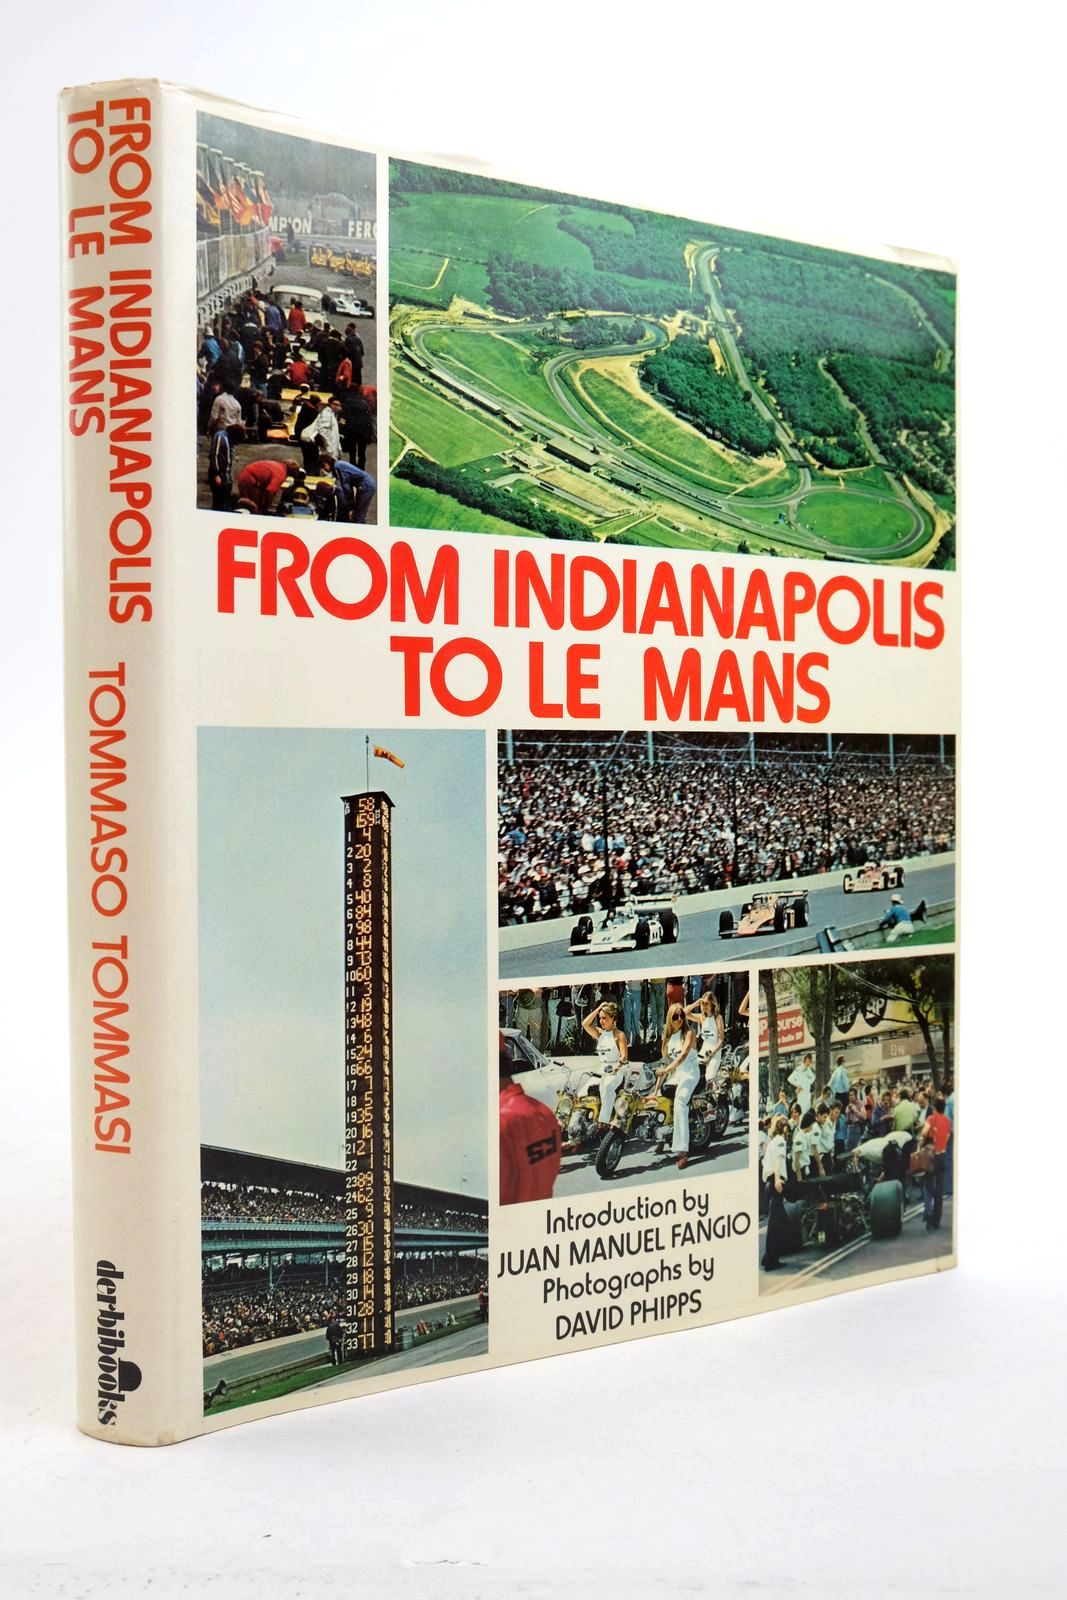 Photo of FROM INDIANAPOLIS TO LE MANS written by Tommasi, Tommaso Fangio, Juan Manuel published by Derbi Books Inc. (STOCK CODE: 2140137)  for sale by Stella & Rose's Books